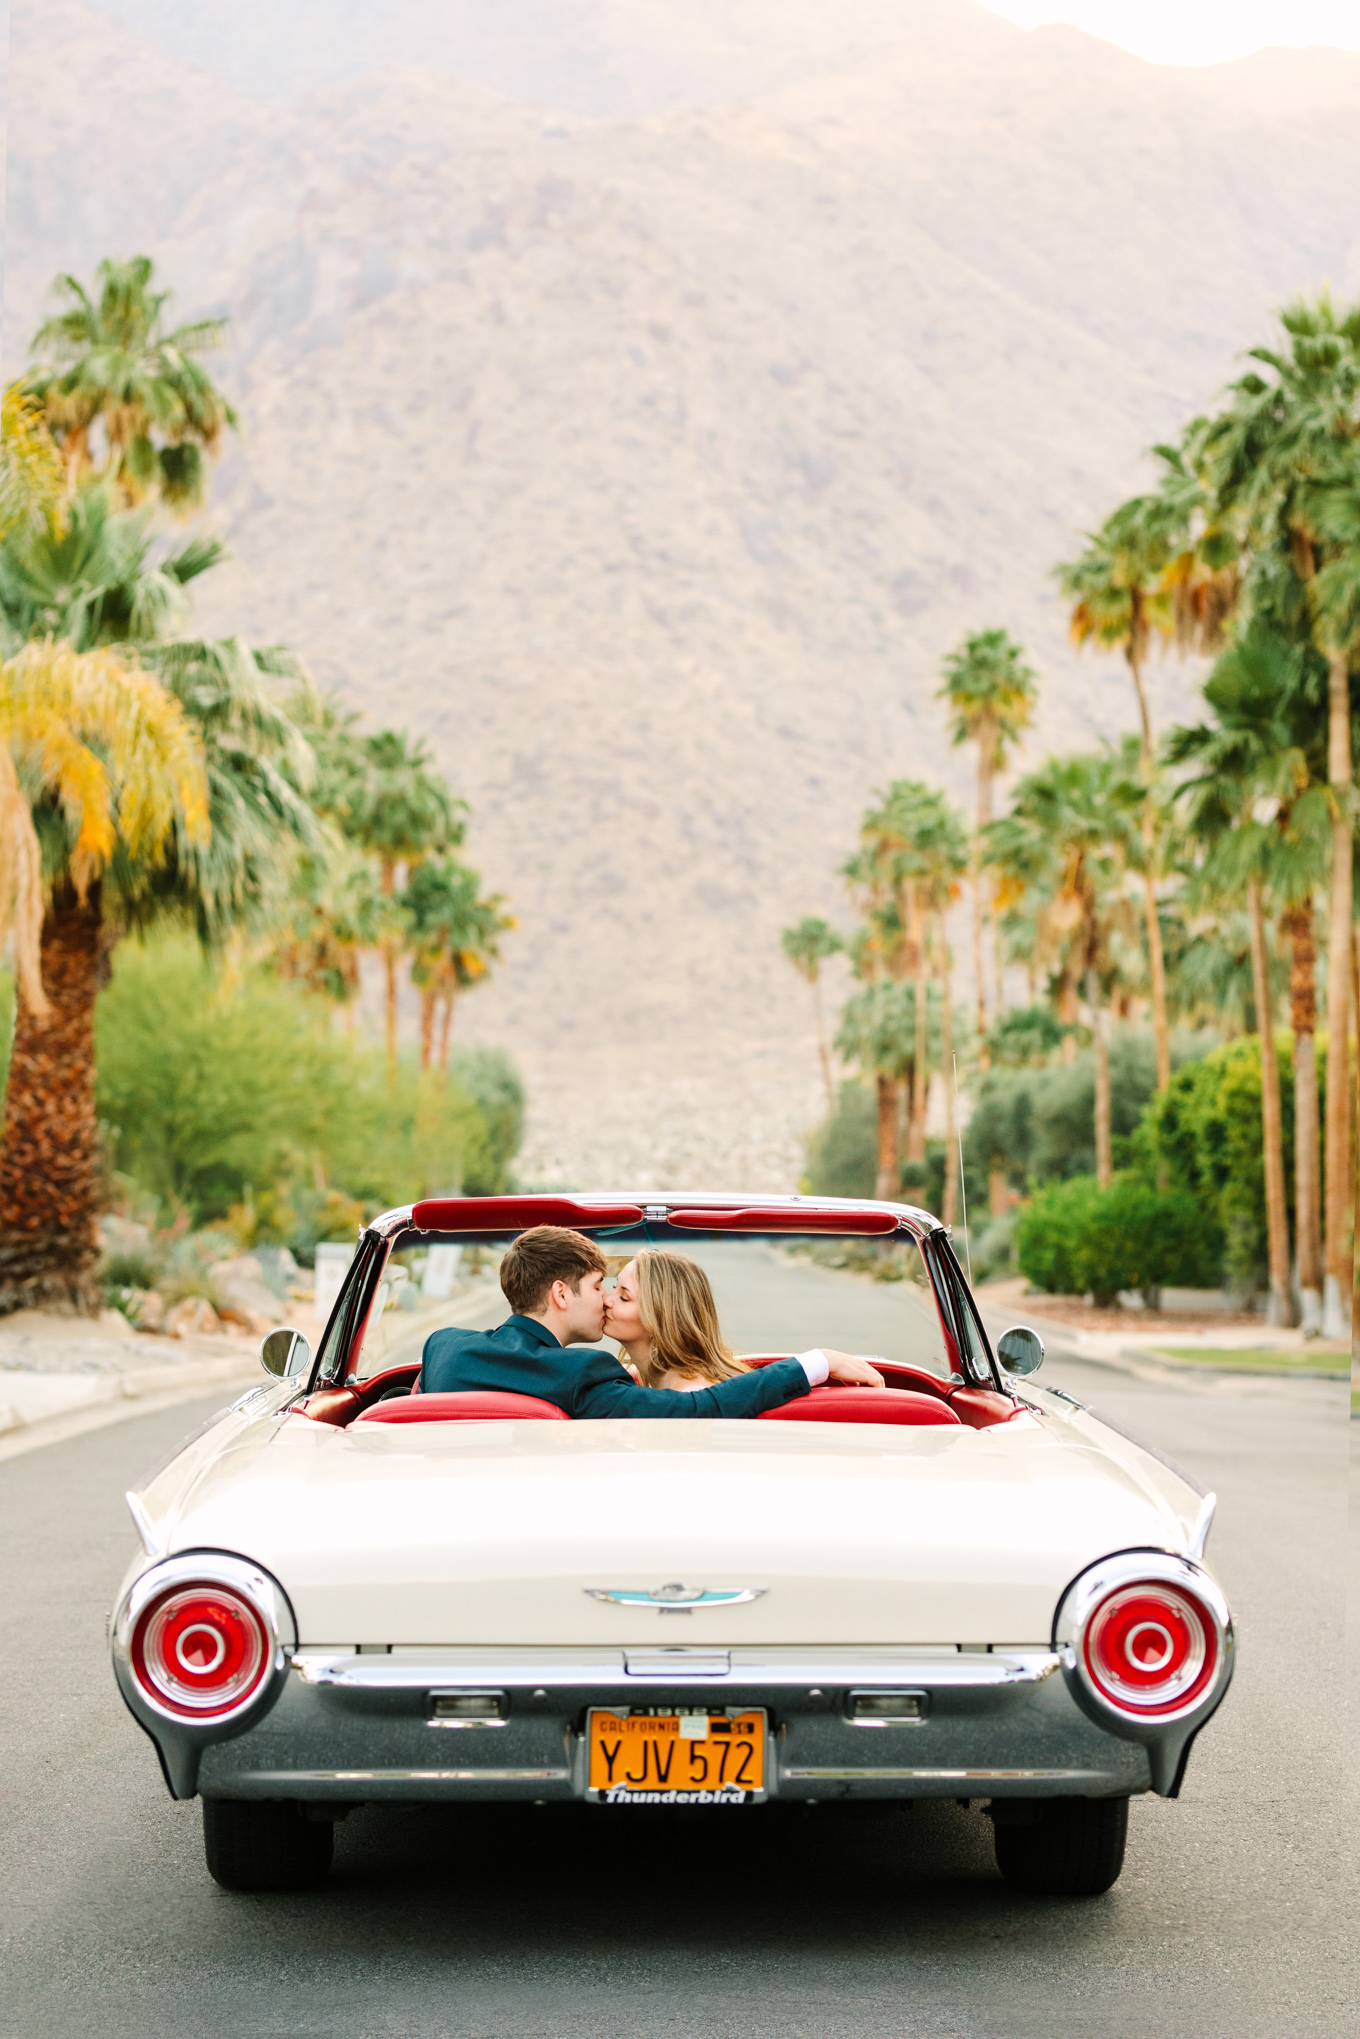 Bride and groom with classic car in Mid Century Modern neighborhood | Colorful jewel tone Palm Springs elopement | Fresh and colorful photography for fun-loving couples in Southern California | #colorfulelopement #palmspringselopement #elopementphotography #palmspringswedding Source: Mary Costa Photography | Los Angeles